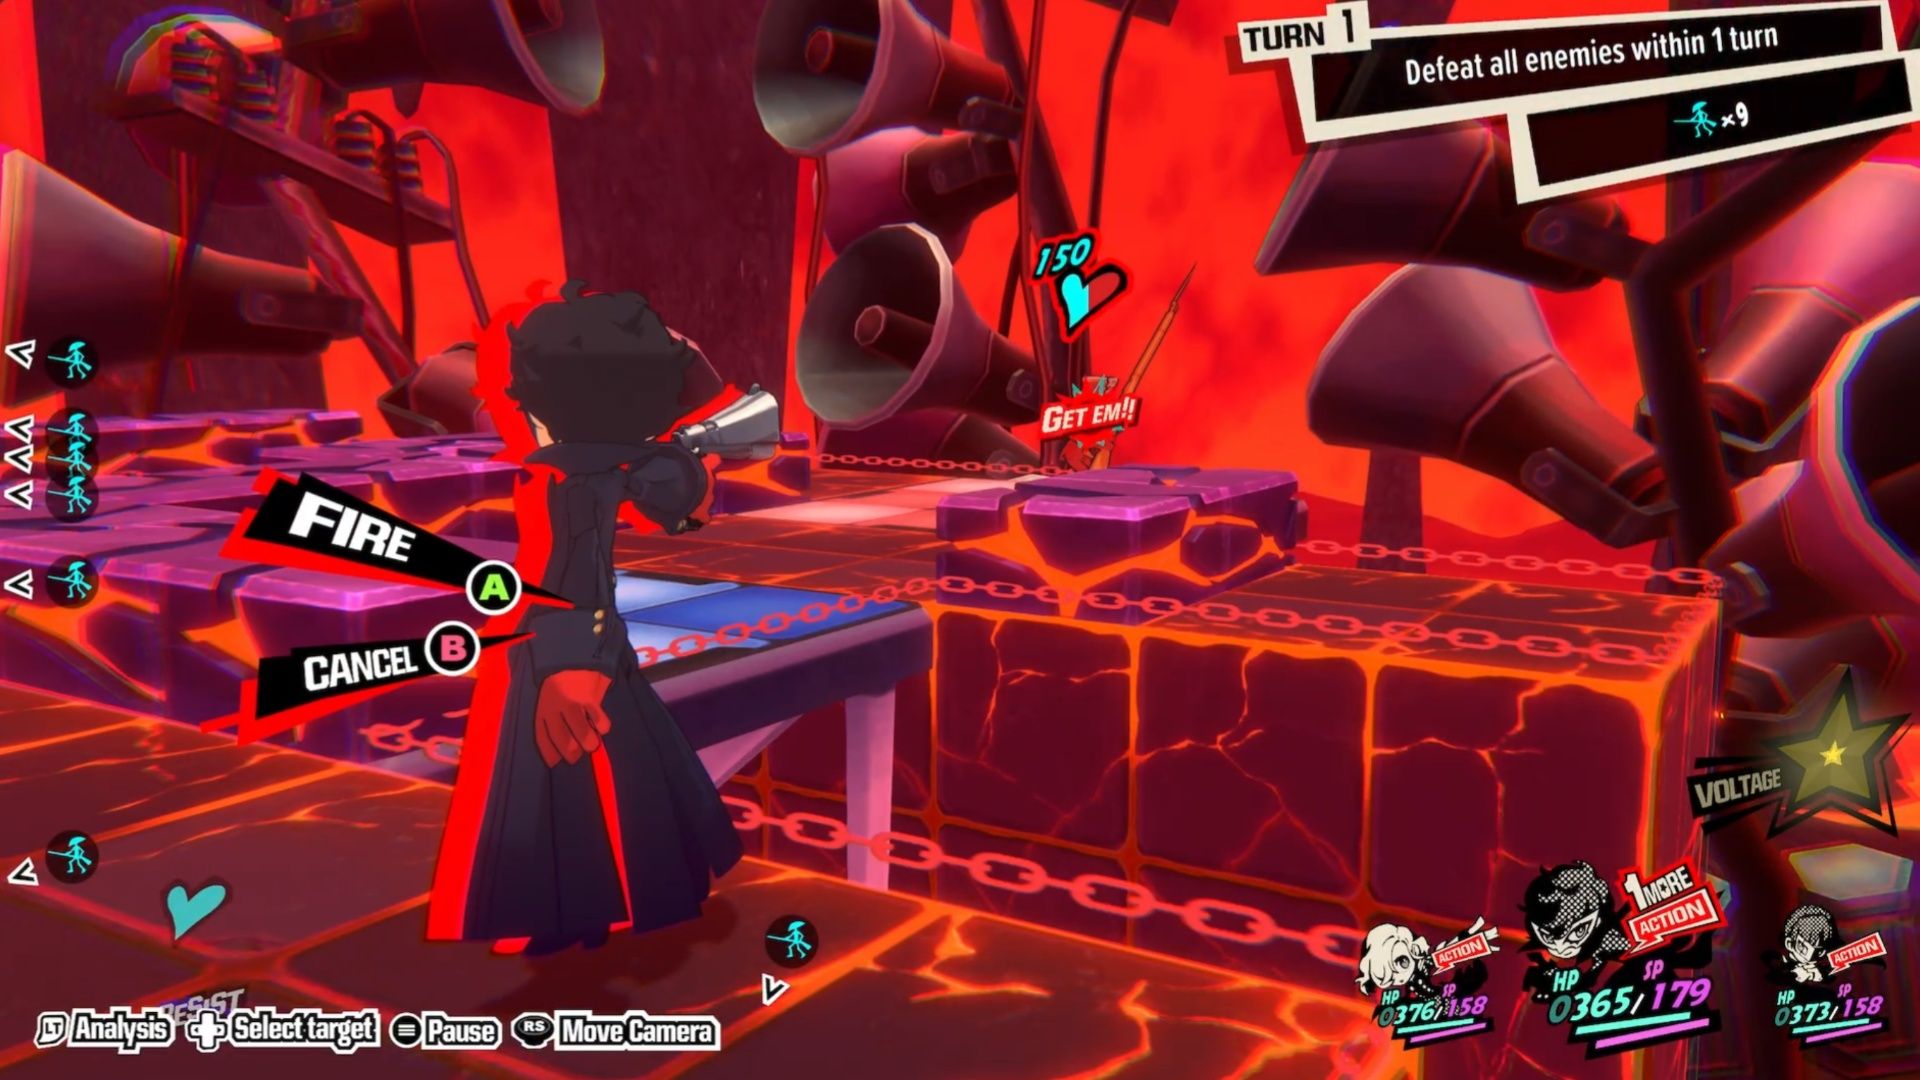 Joker holds up his gun to shoot an enemy during Quest 12 in Persona 5 Tactica.